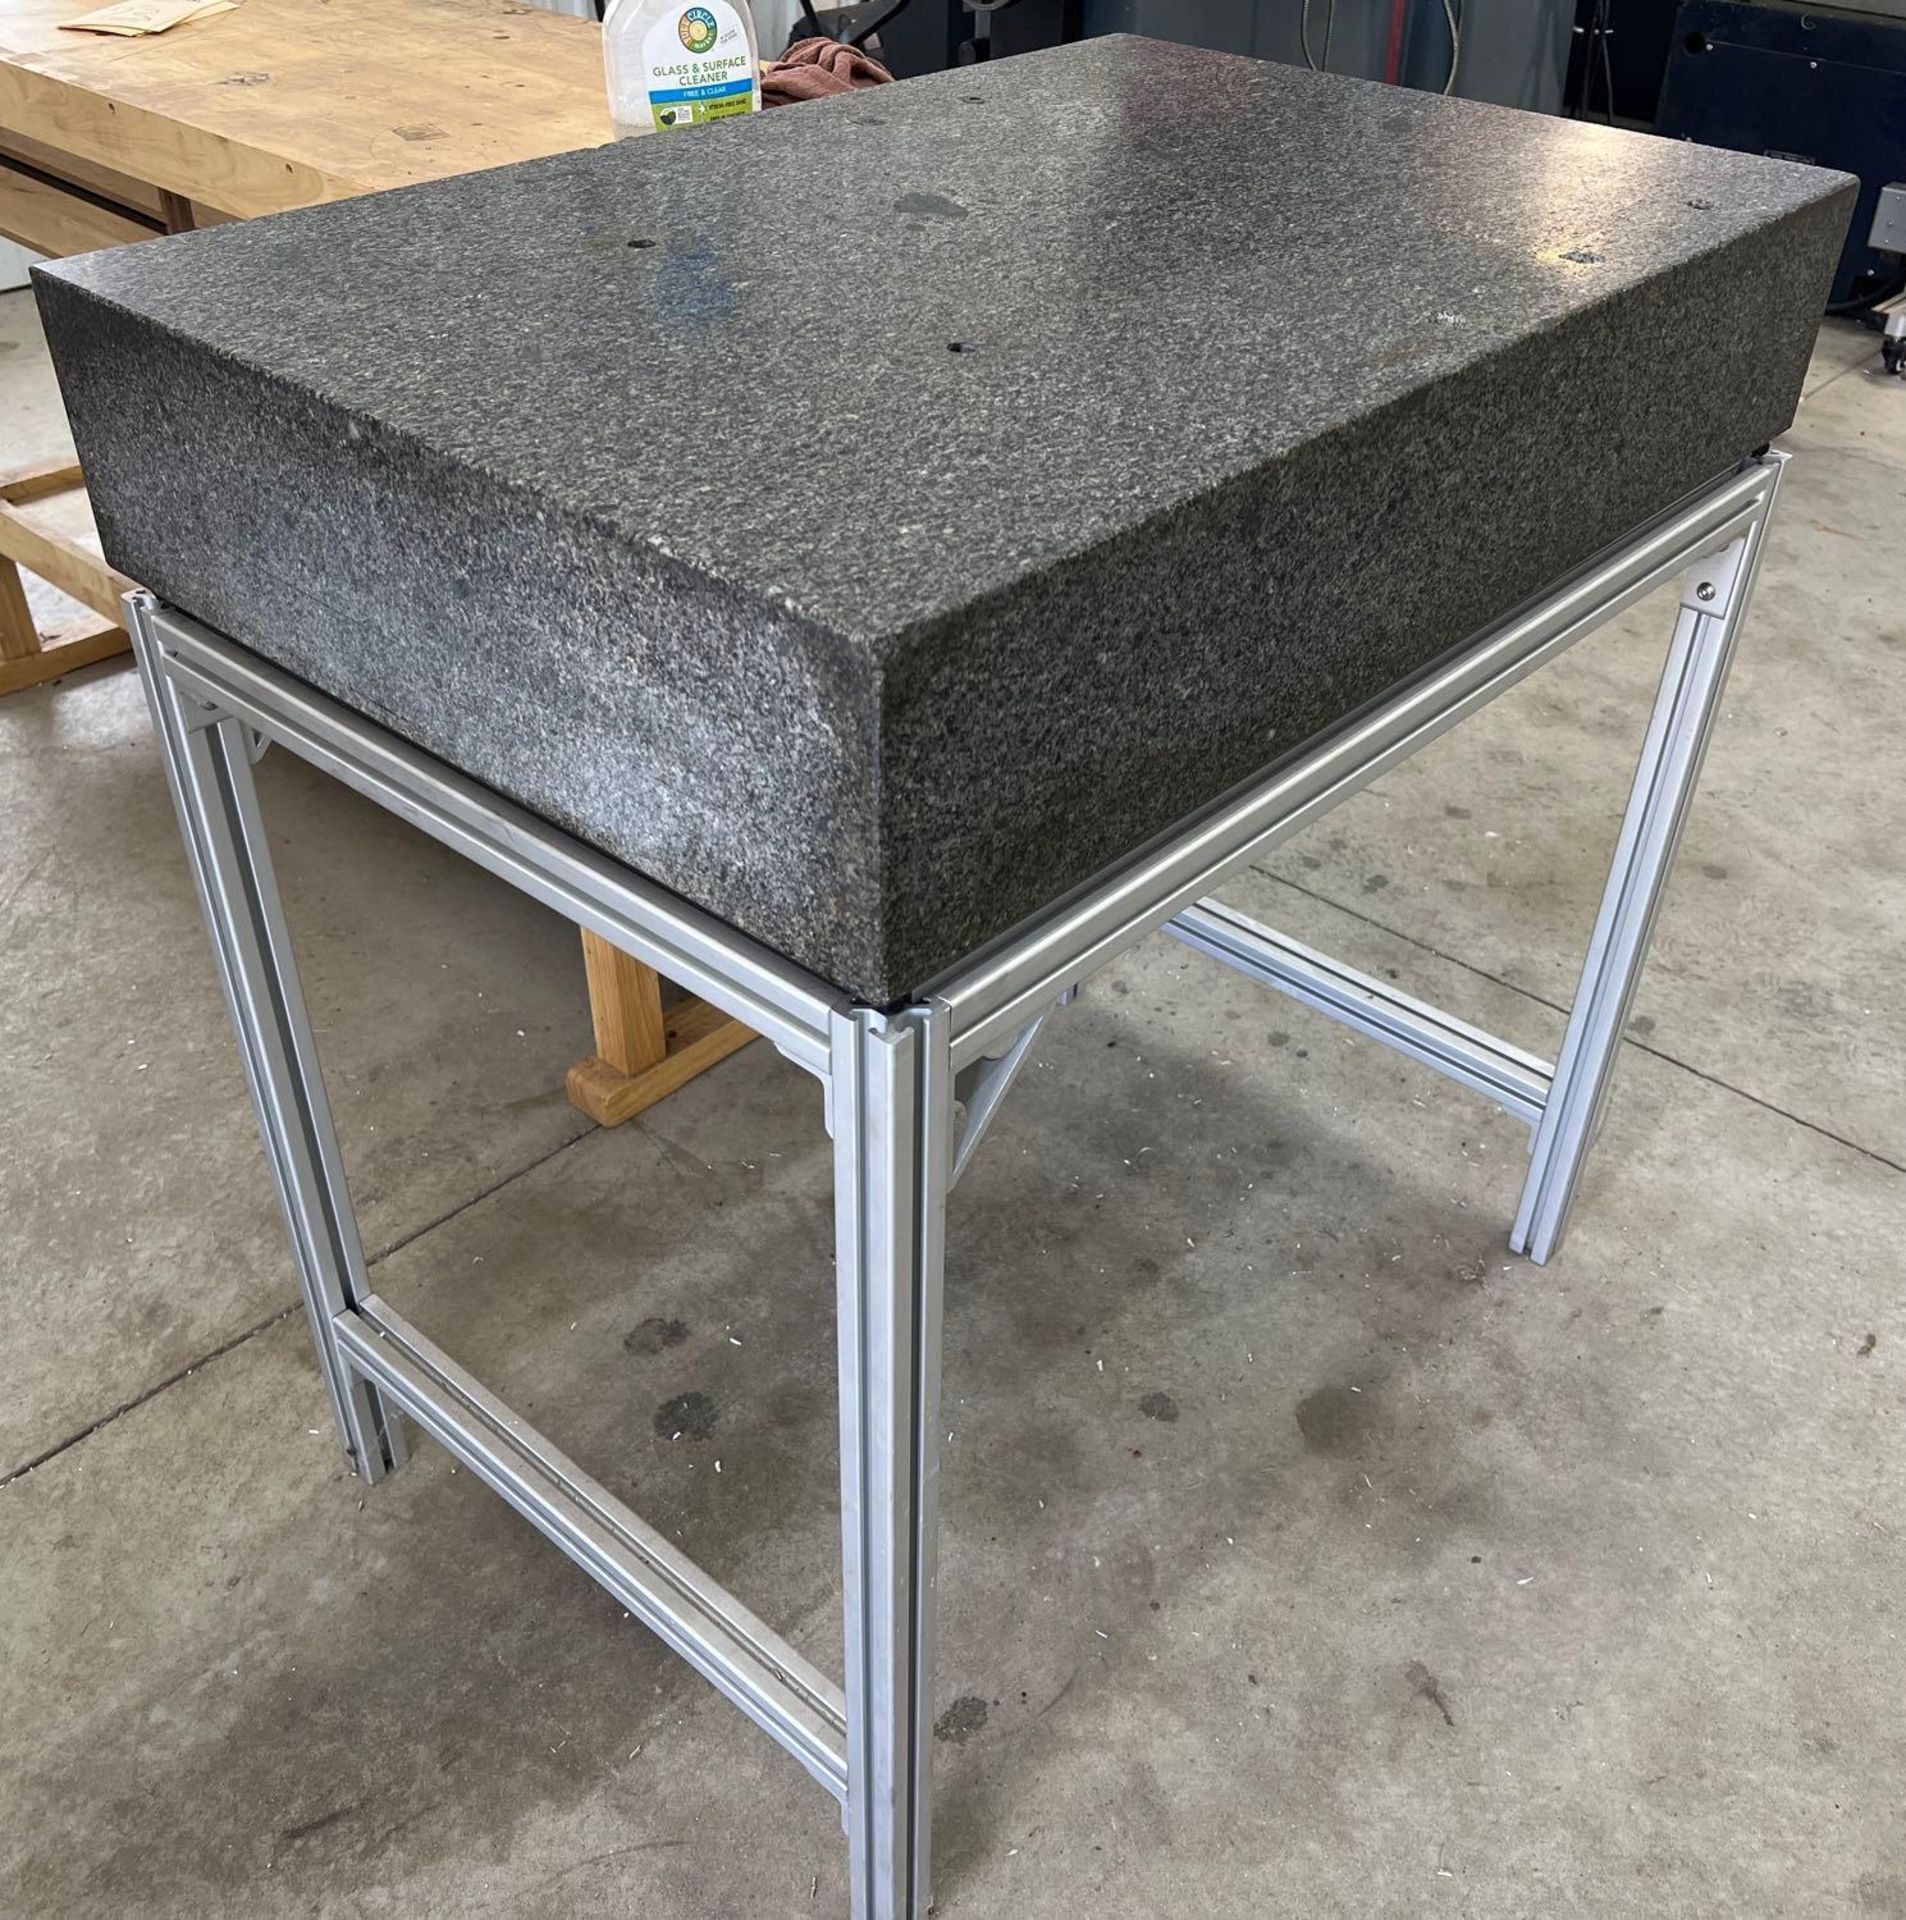 36"x24"x6" Granite Inspection Plate w/Stand